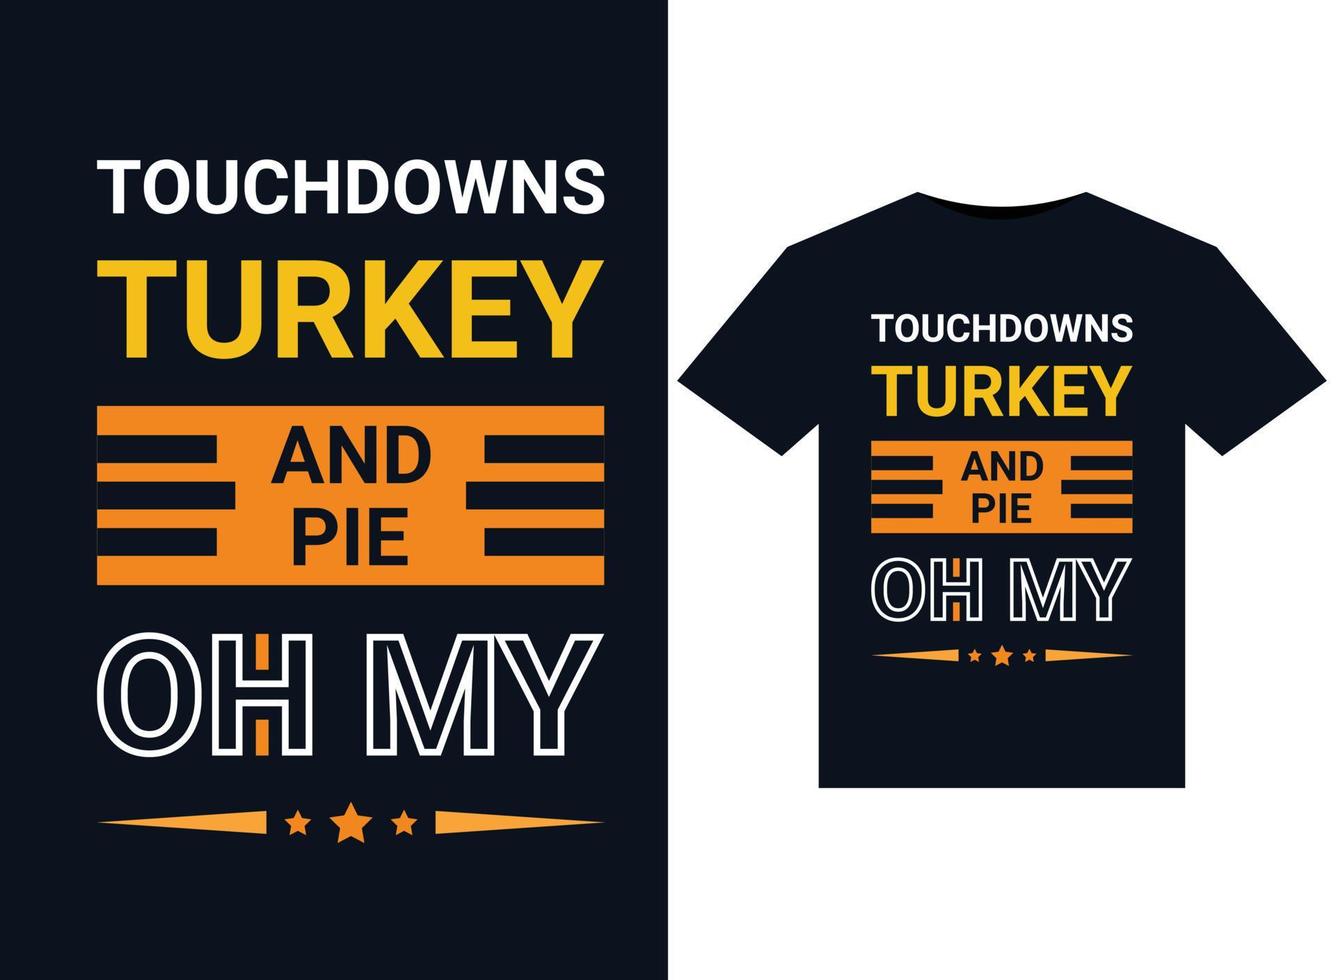 Touchdowns turkey and pie oh my T-Shirts typography vector illustration for print-ready graphic design